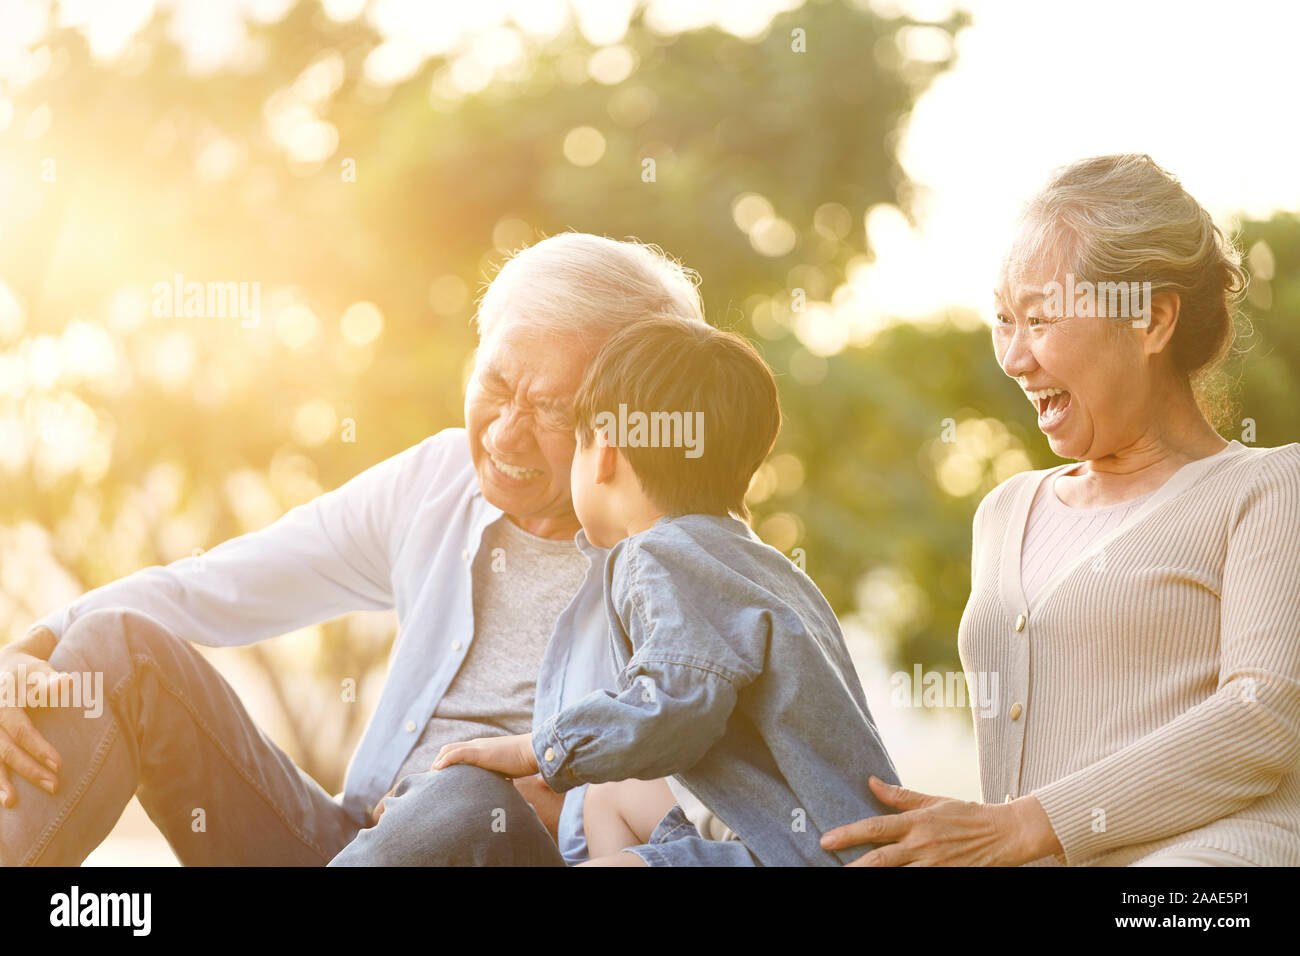 asian grandson, grandfather and grandmother sitting on grass having fun outdoors in park at sunset Stock Photo